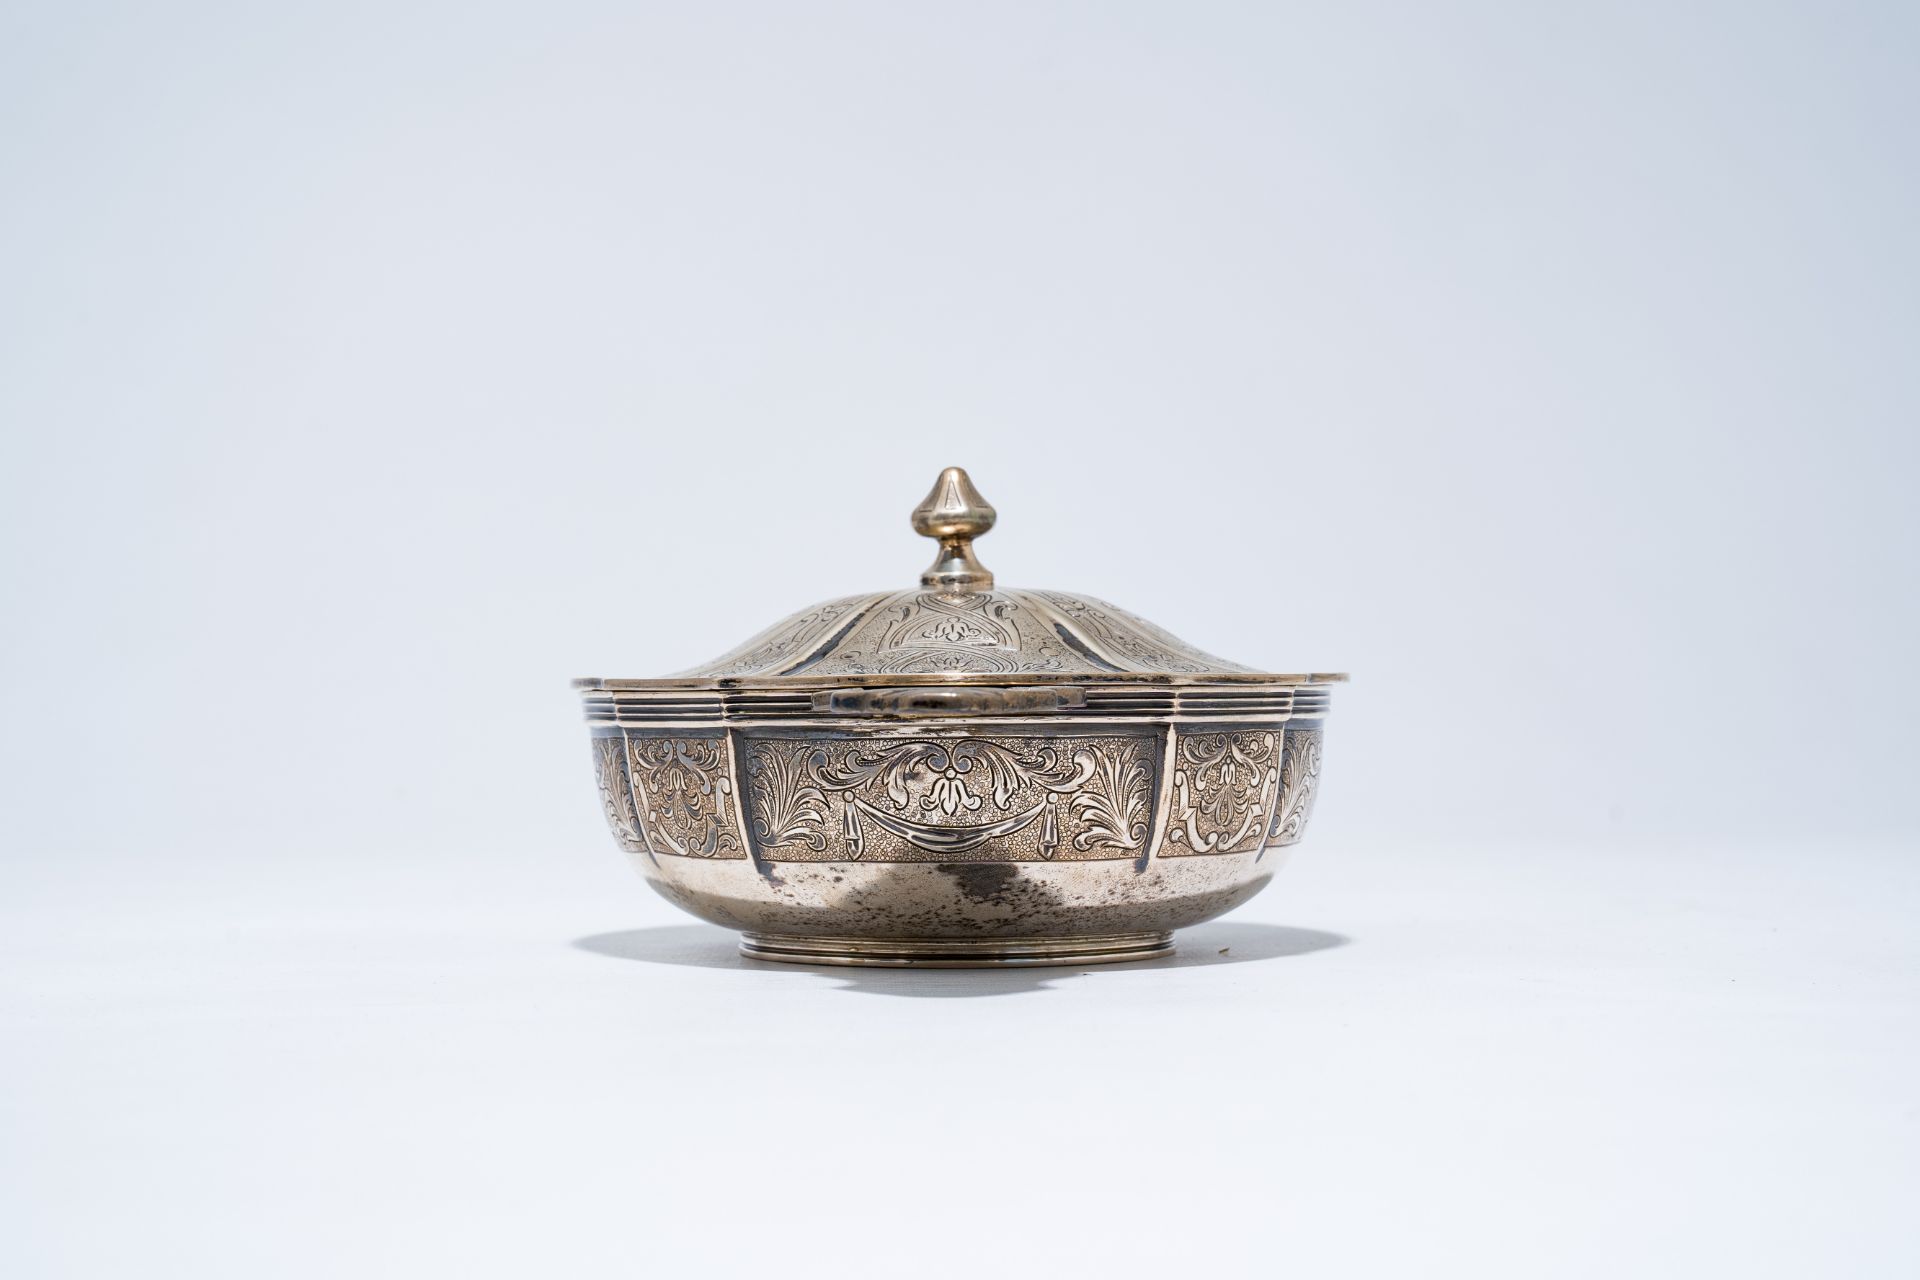 A Belgian silver bowl and cover with floral design, maker's mark Wolfers, 800/000, 20th C. - Image 4 of 9